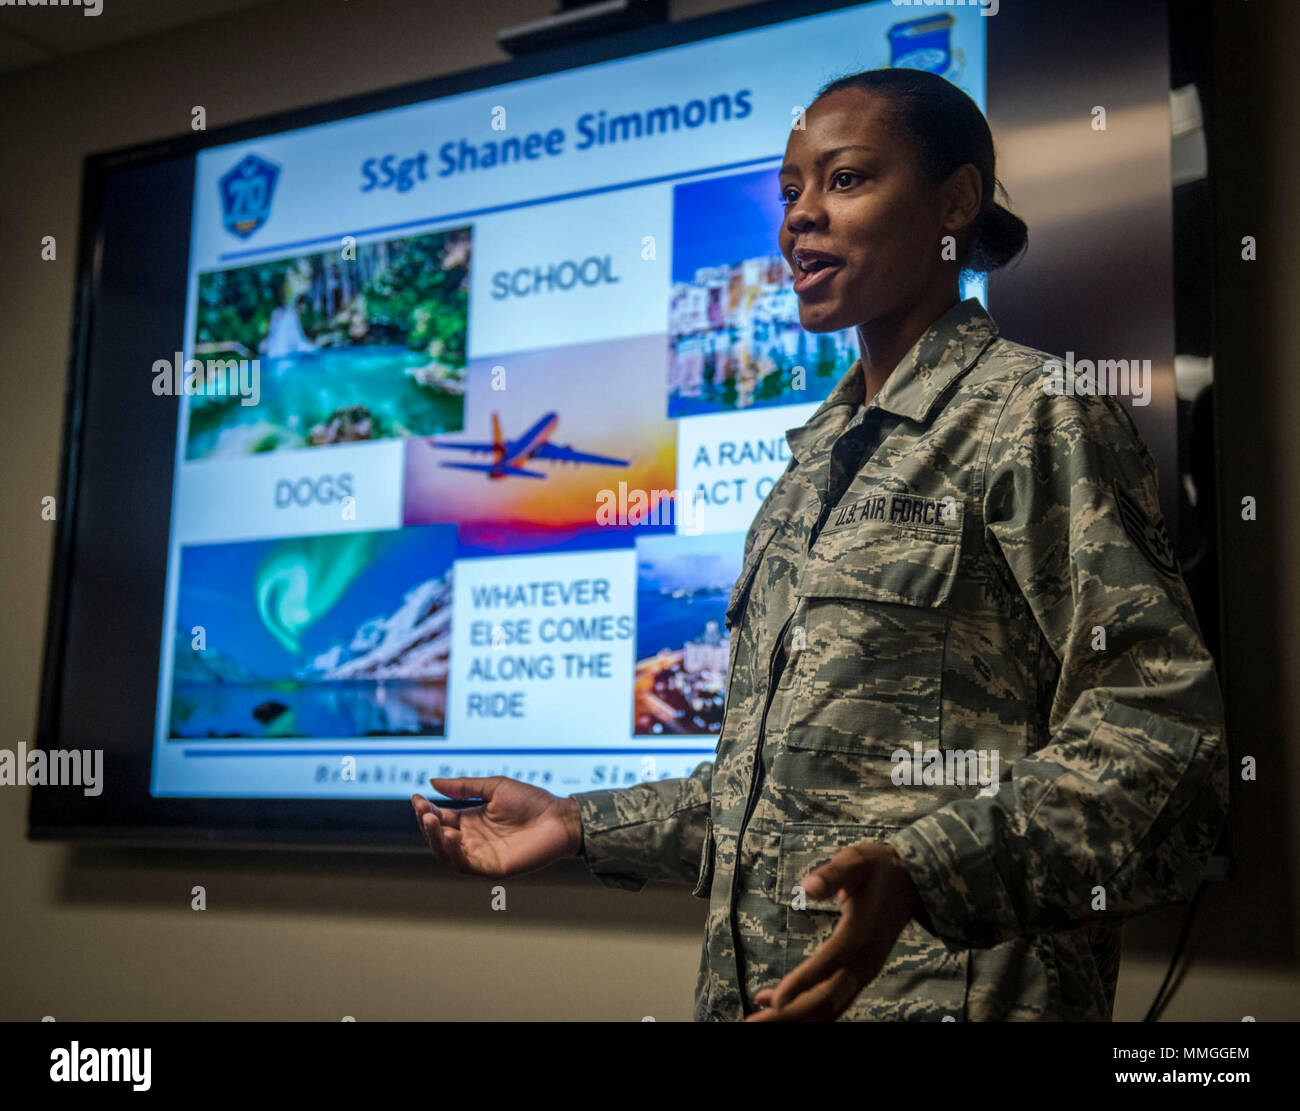 Staff Sgt. Shanee Simmons, health services management technician, 932nd  Aerospace Medicine Squadron shares her Air Force story with 932nd Airlift  Wing leadership during the wing review meeting Sept. 8, 2017, Scott Air